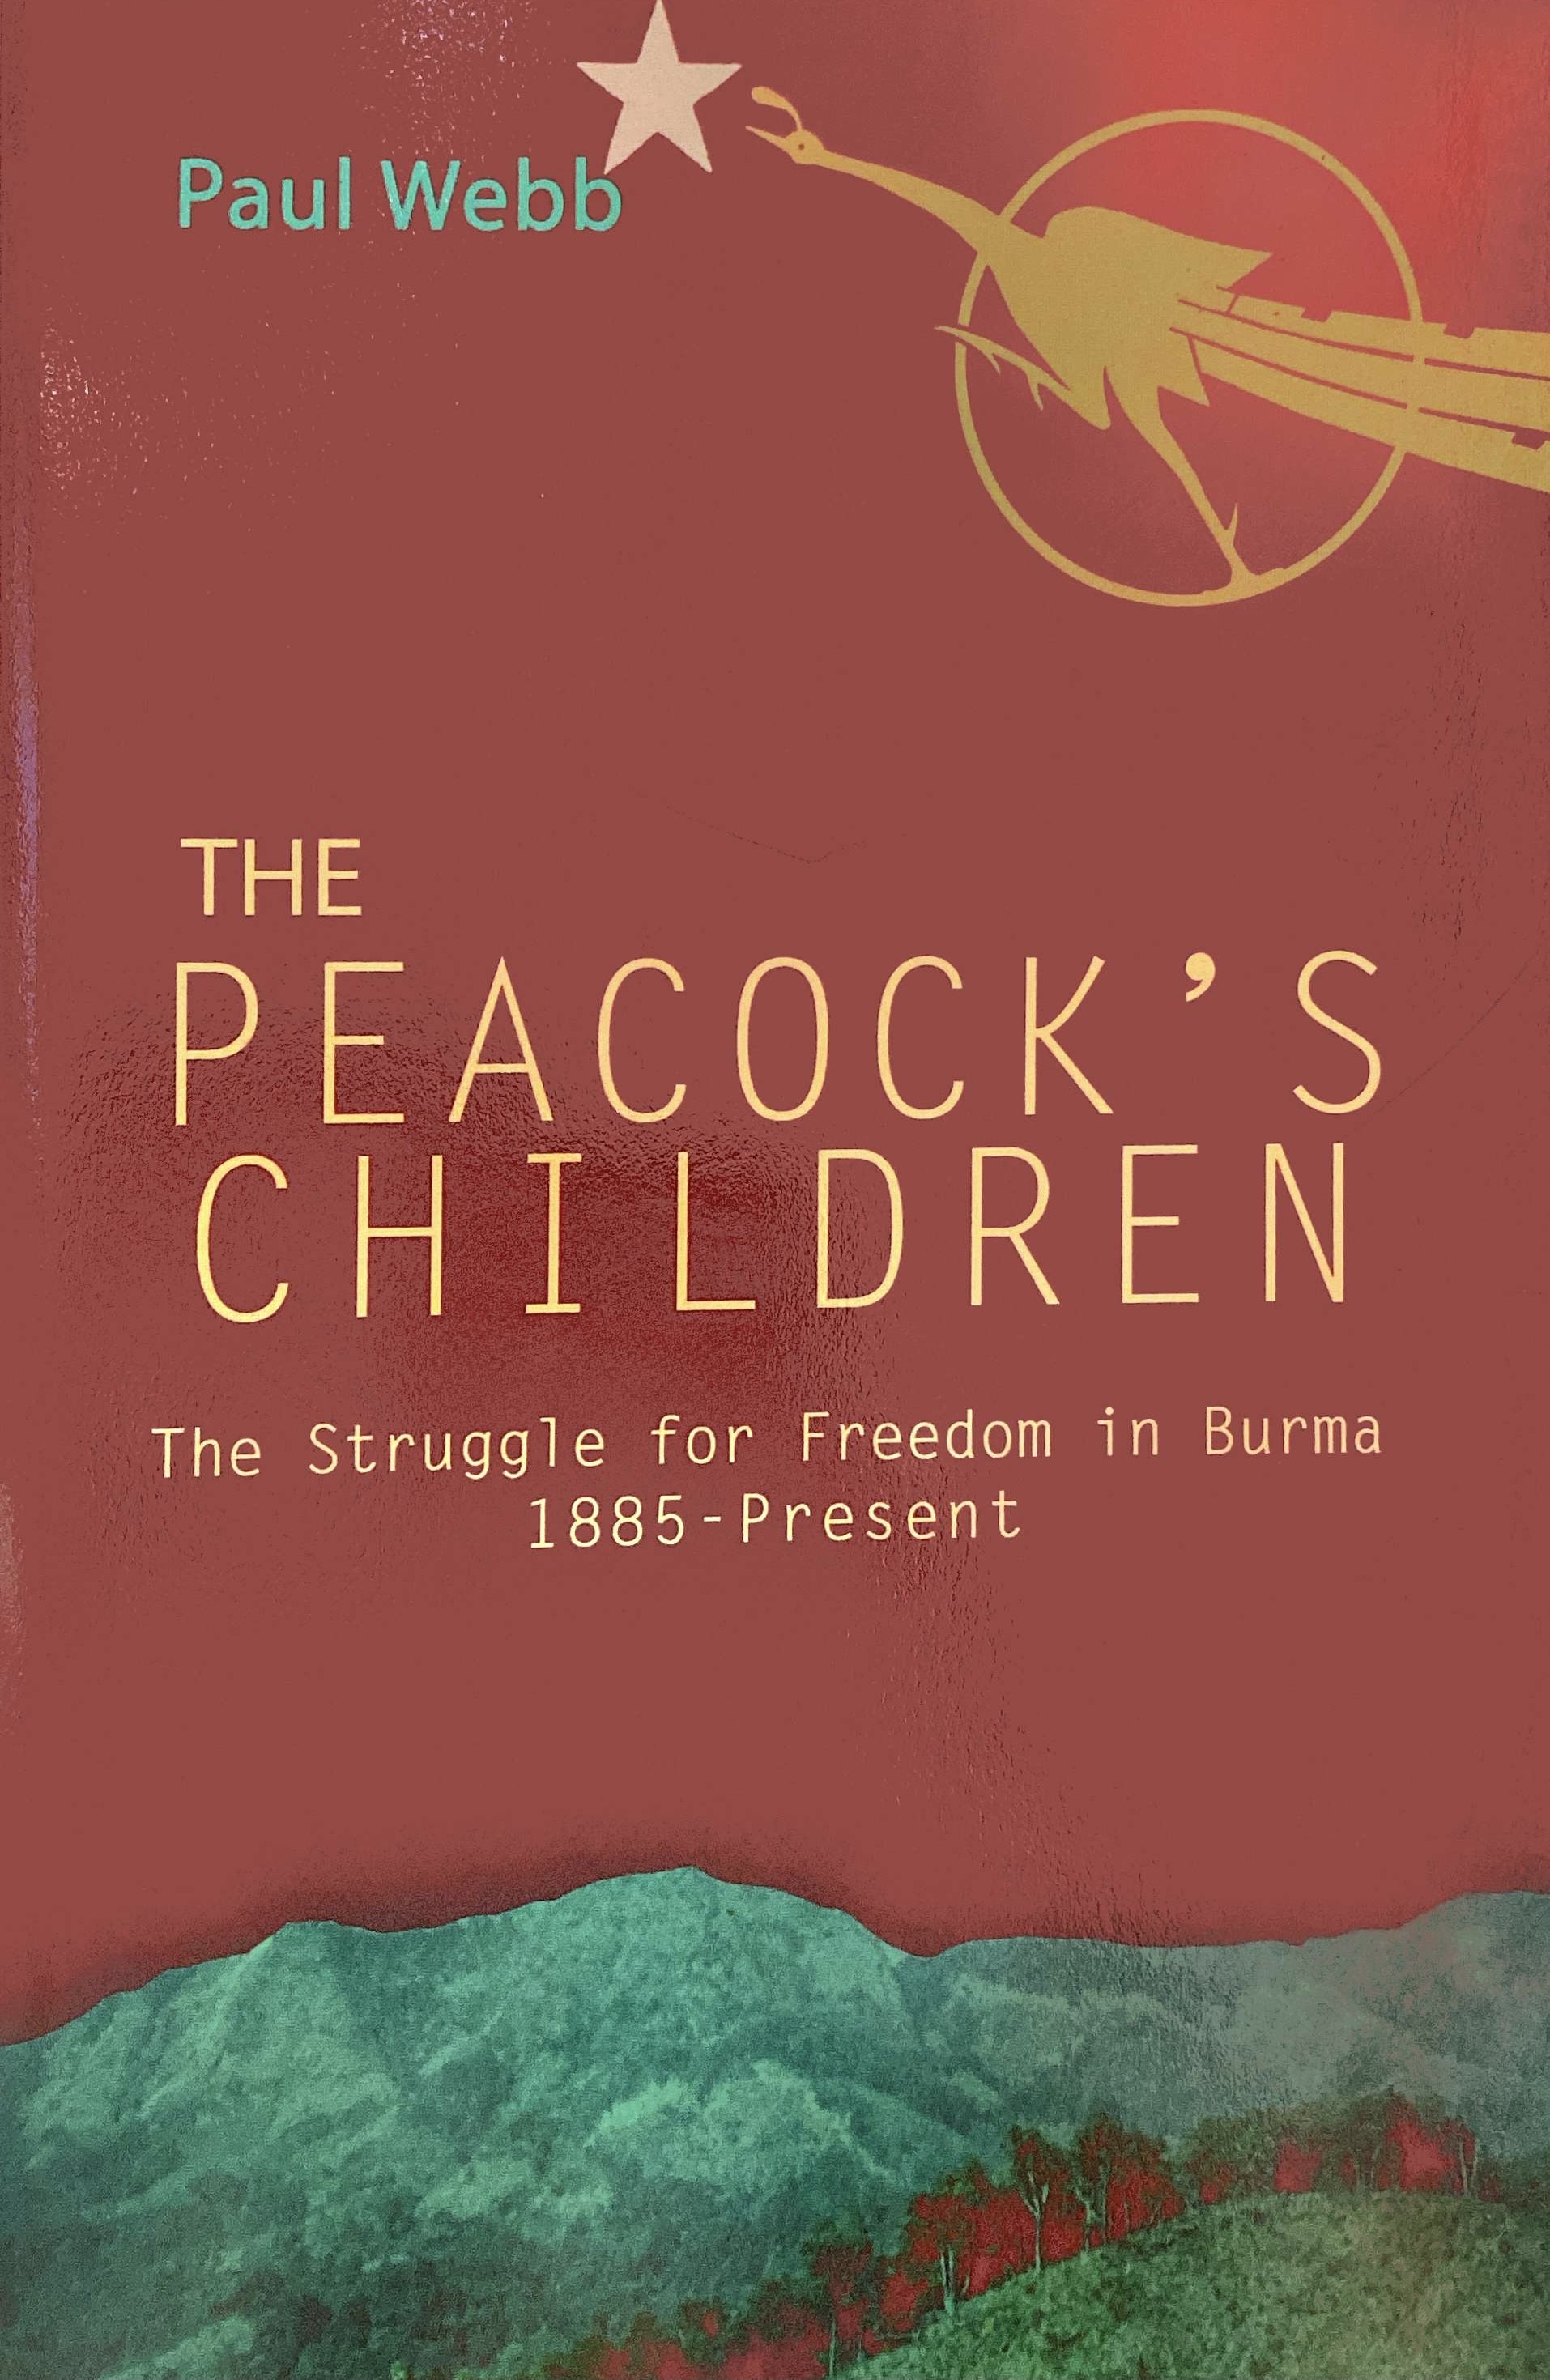 The Peacock’s Children: The Struggle for Freedom in Burma 1885- Present